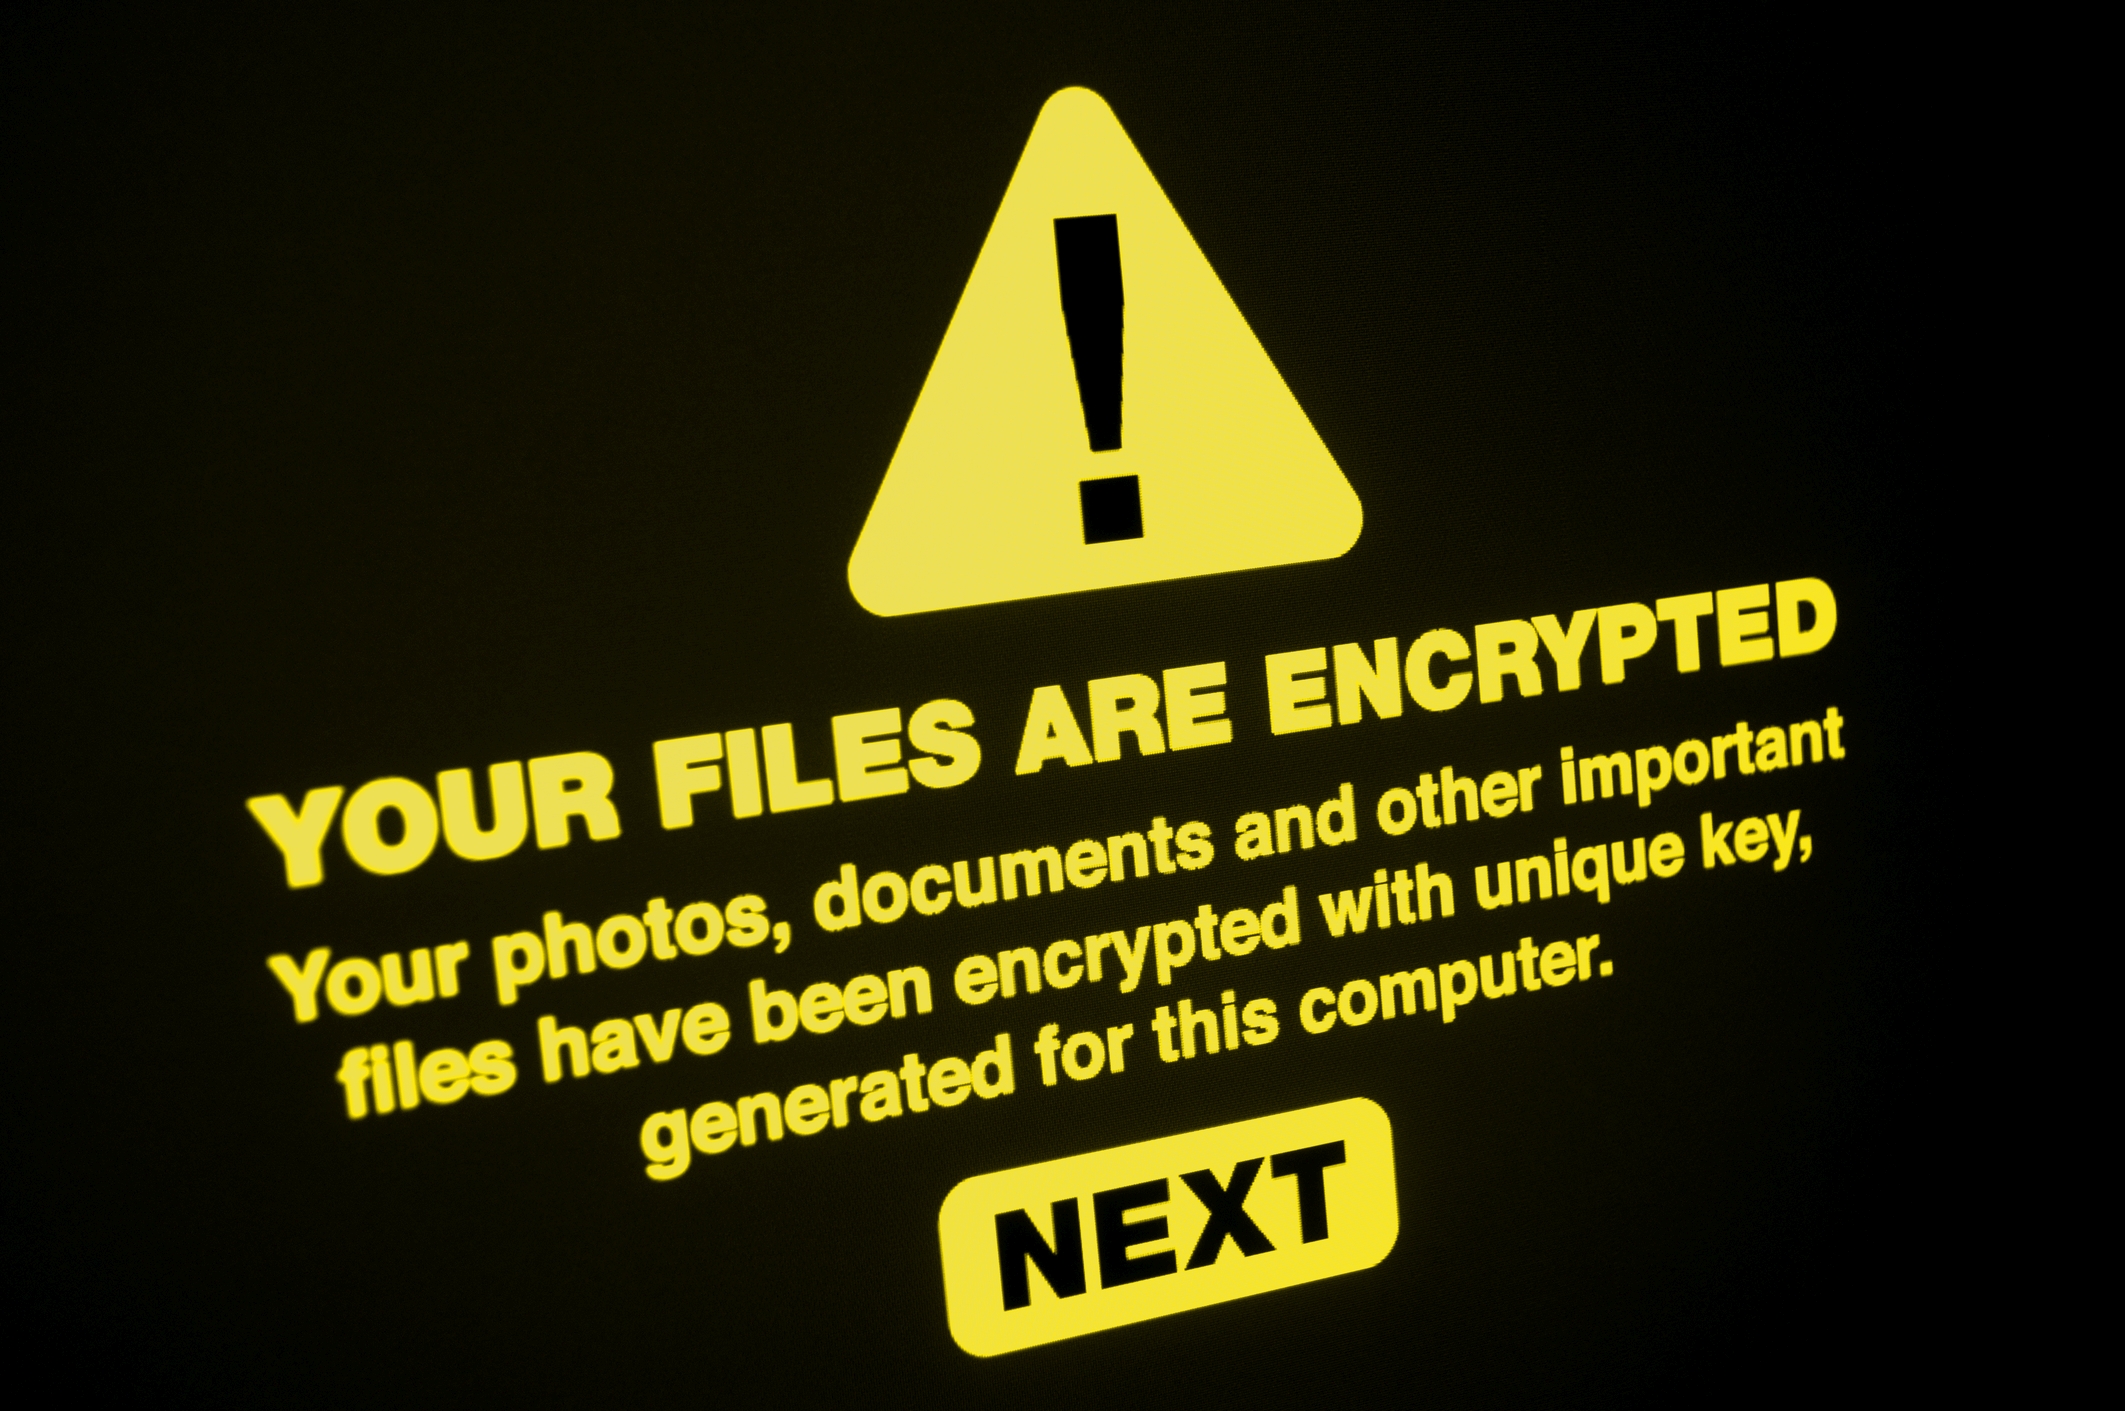 What can you do when important files are encrypted?